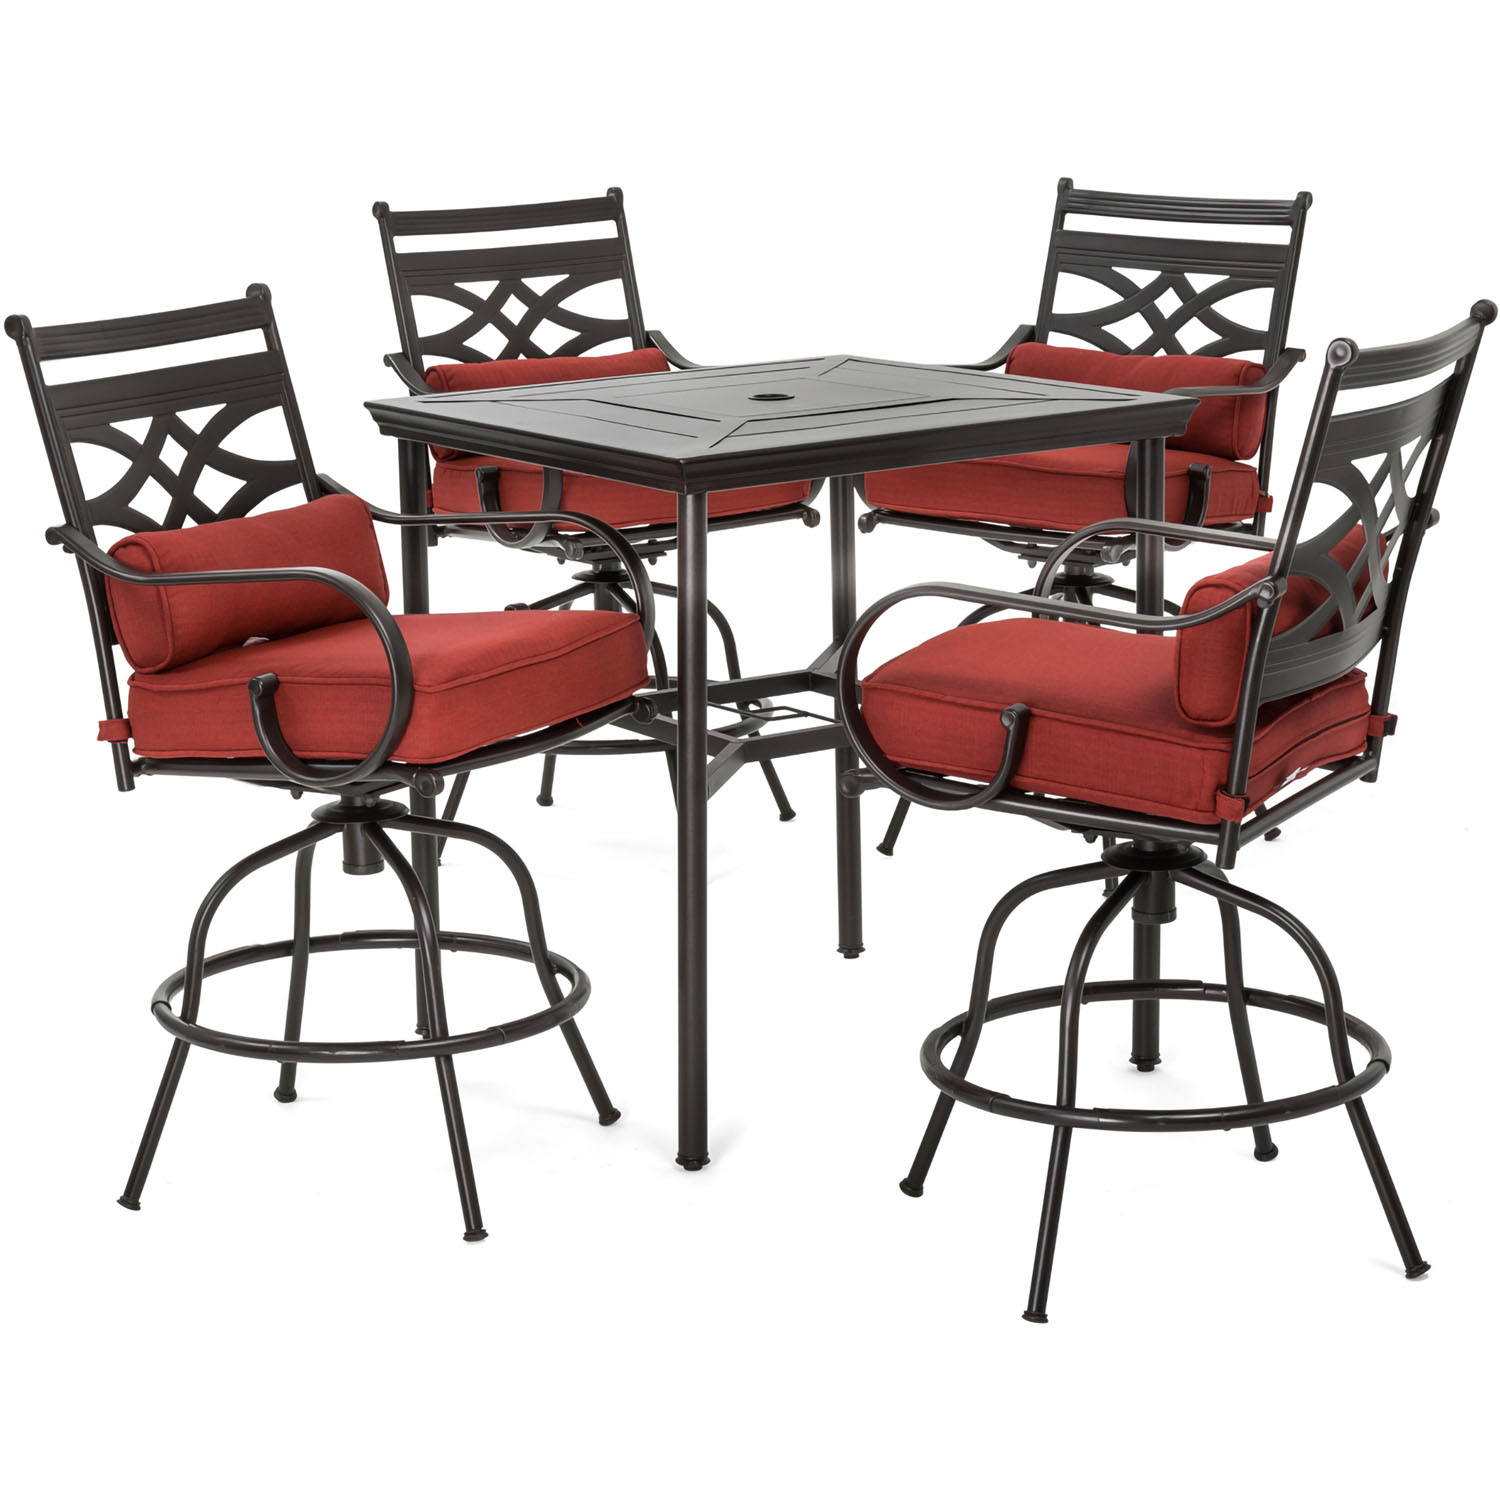 Hanover Montclair 5-Piece Steel Outdoor Counter-Height Patio Dining Set with Bar Table, Seats 4 - image 1 of 13